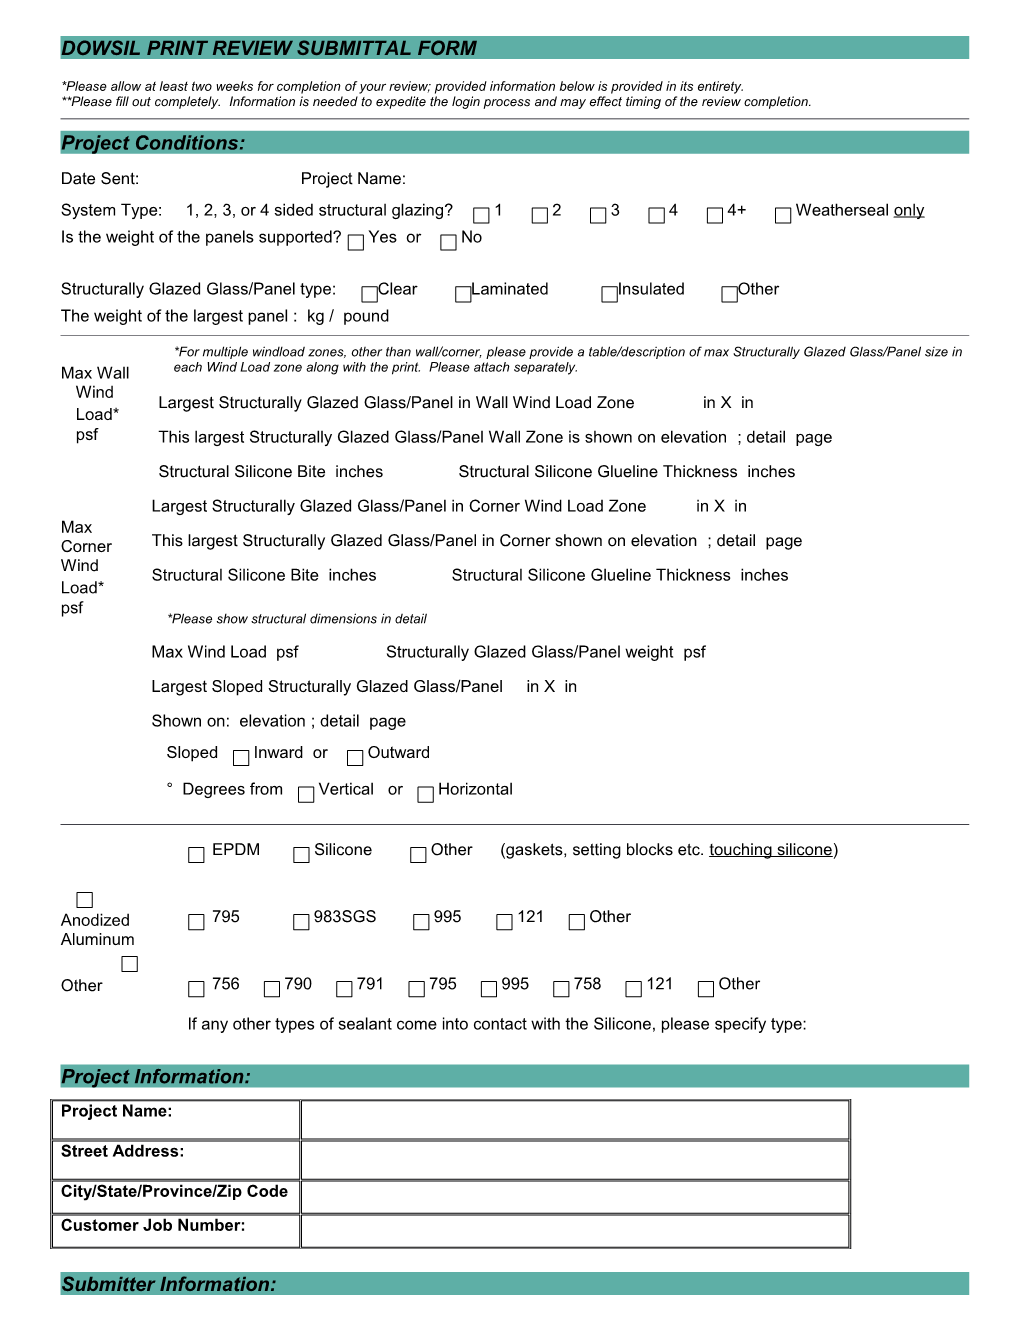 Dow Corning Print Review Submittal Form